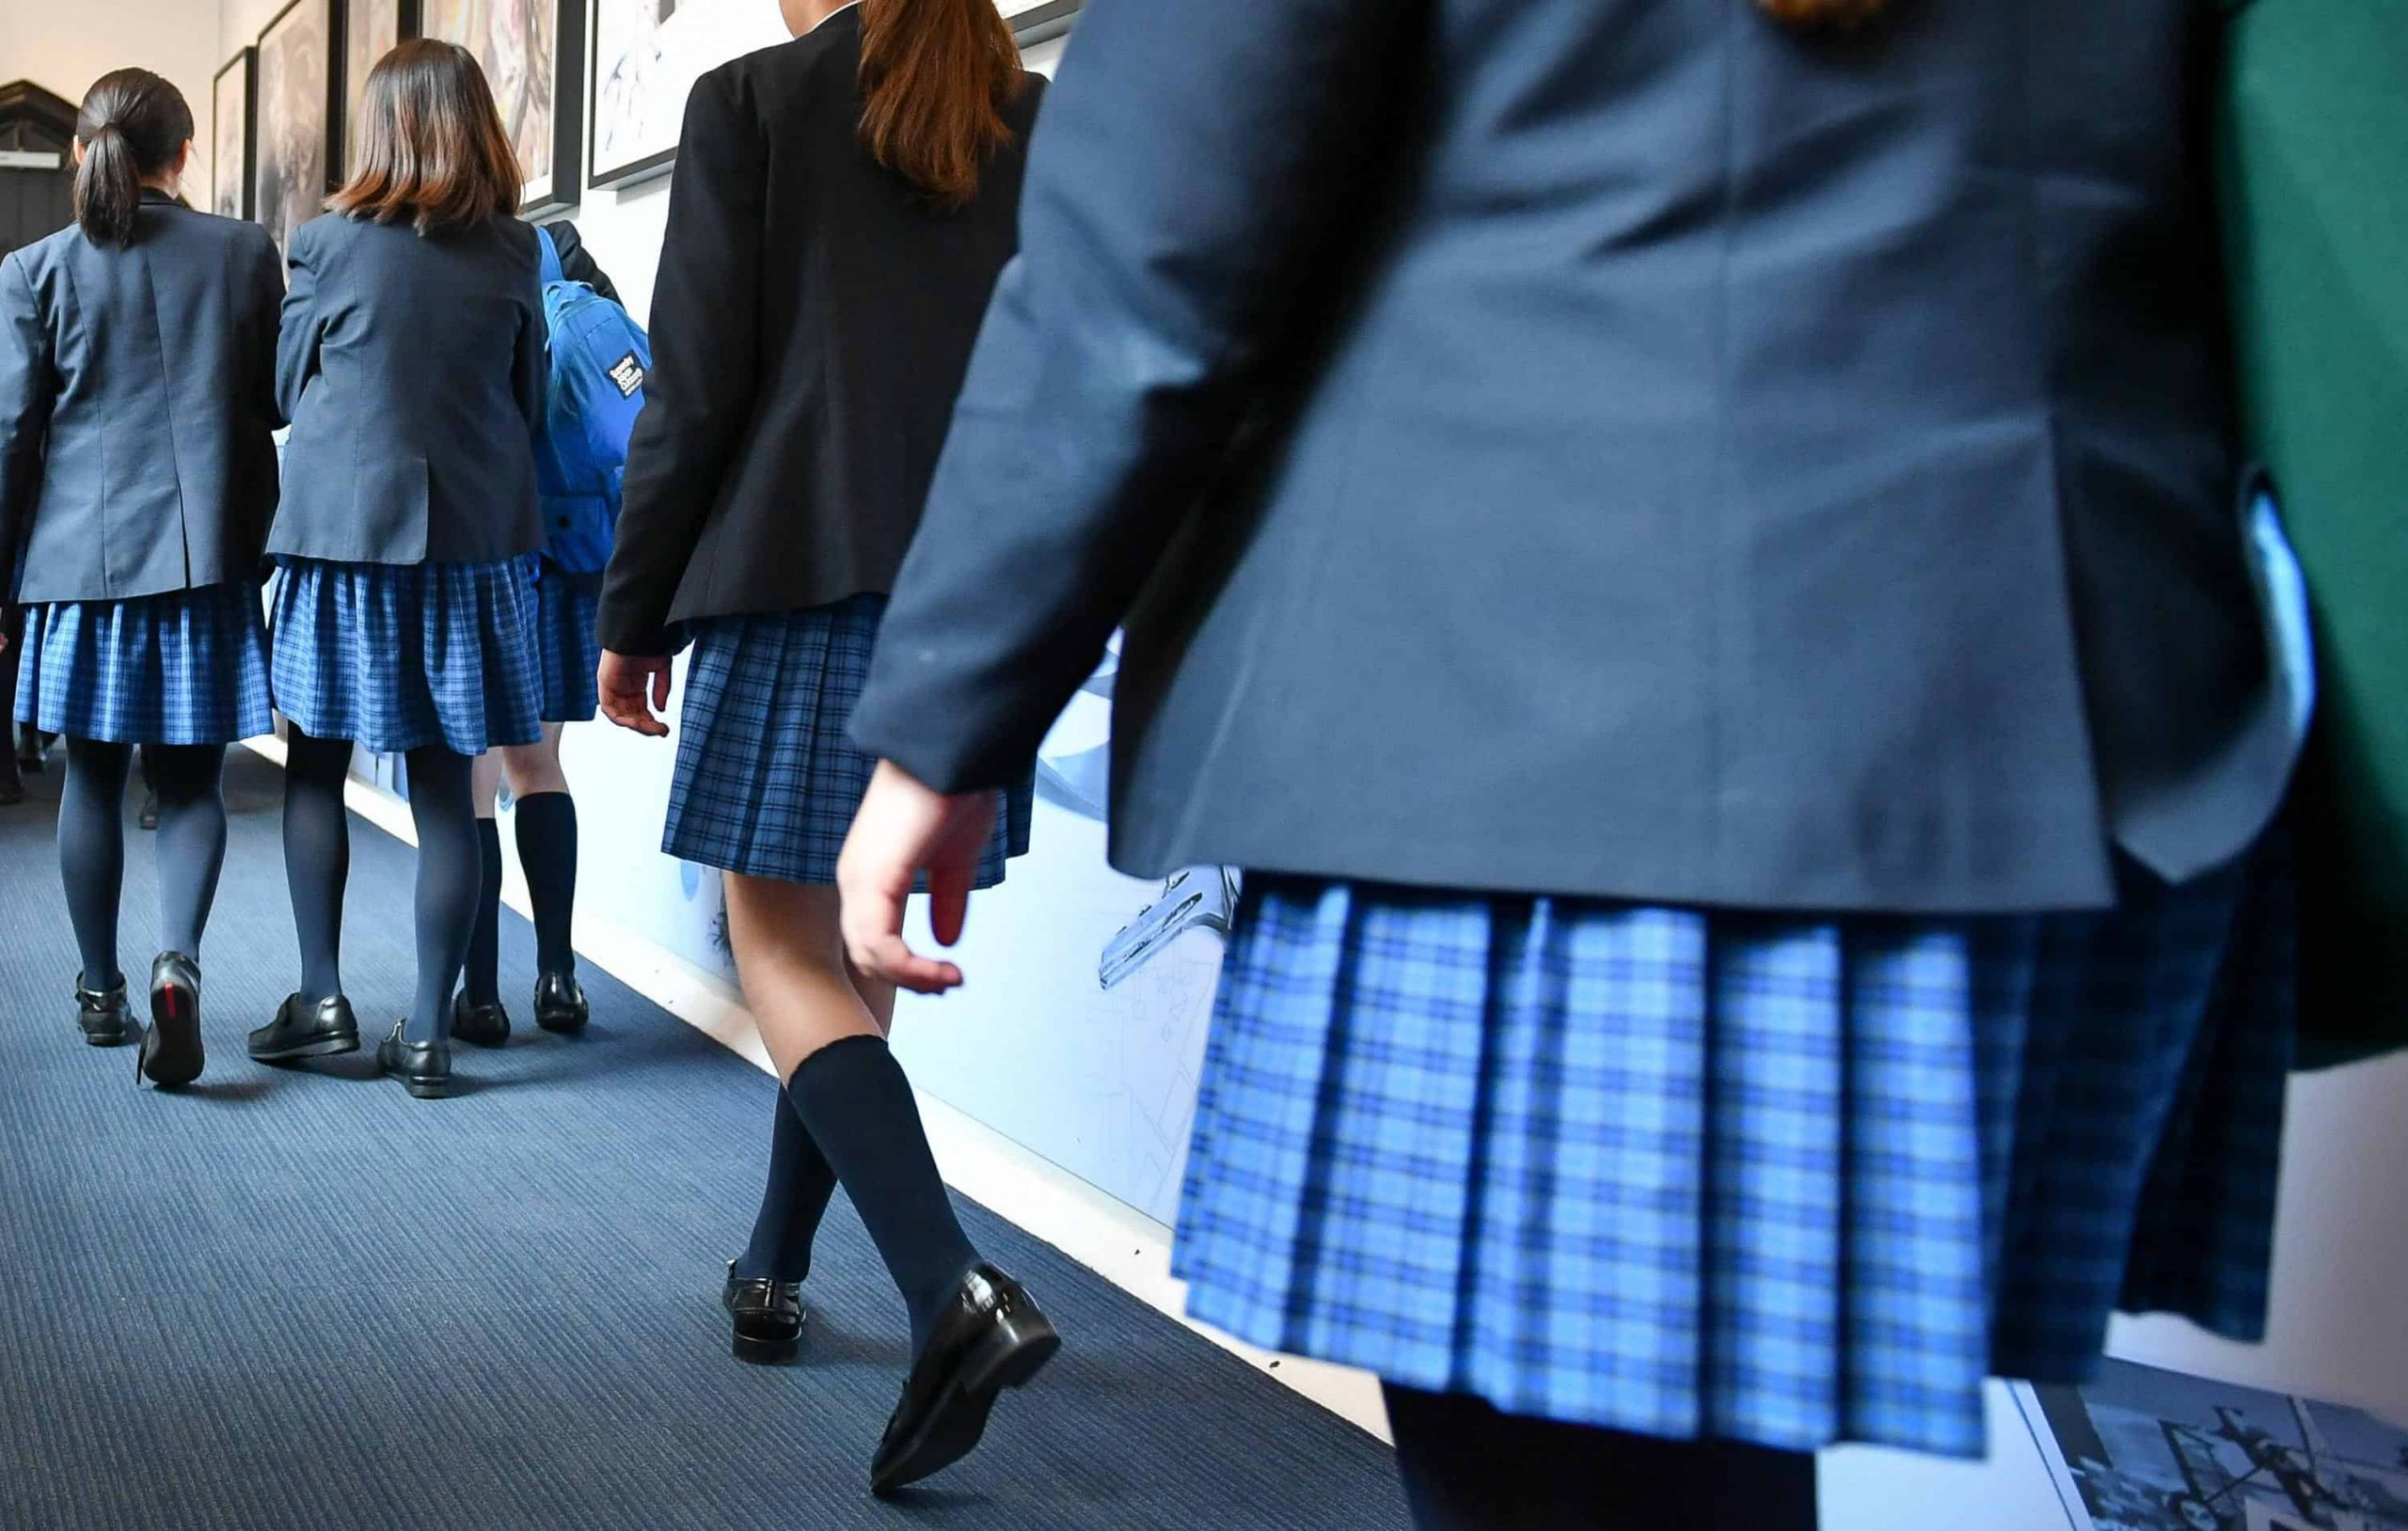 Girls feel boys are treated better than they are, report finds